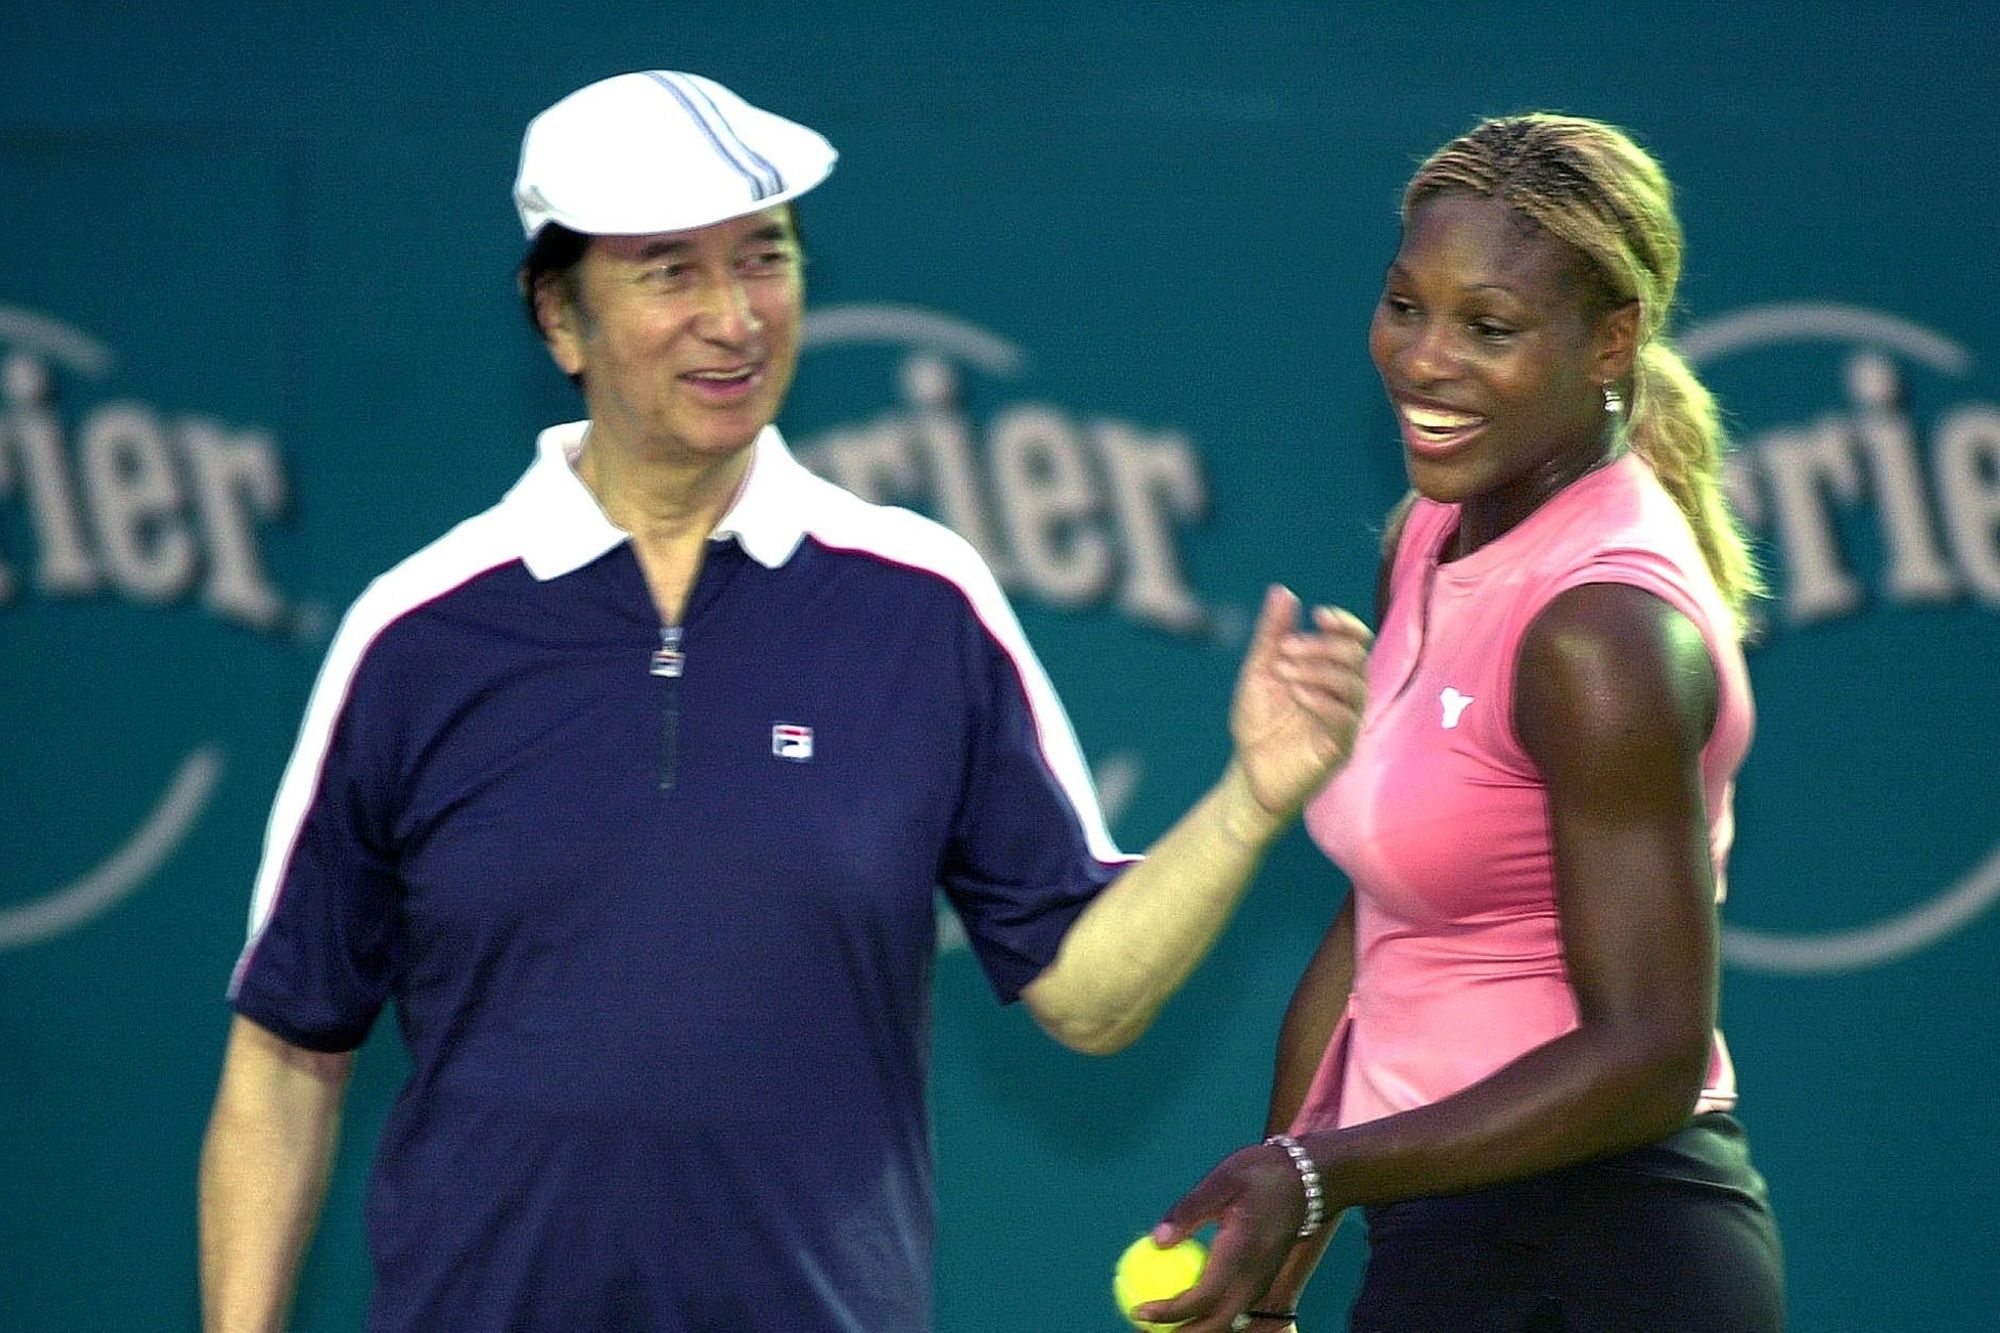 Stanley Ho and Serena Williams playing an exhibition tennis match